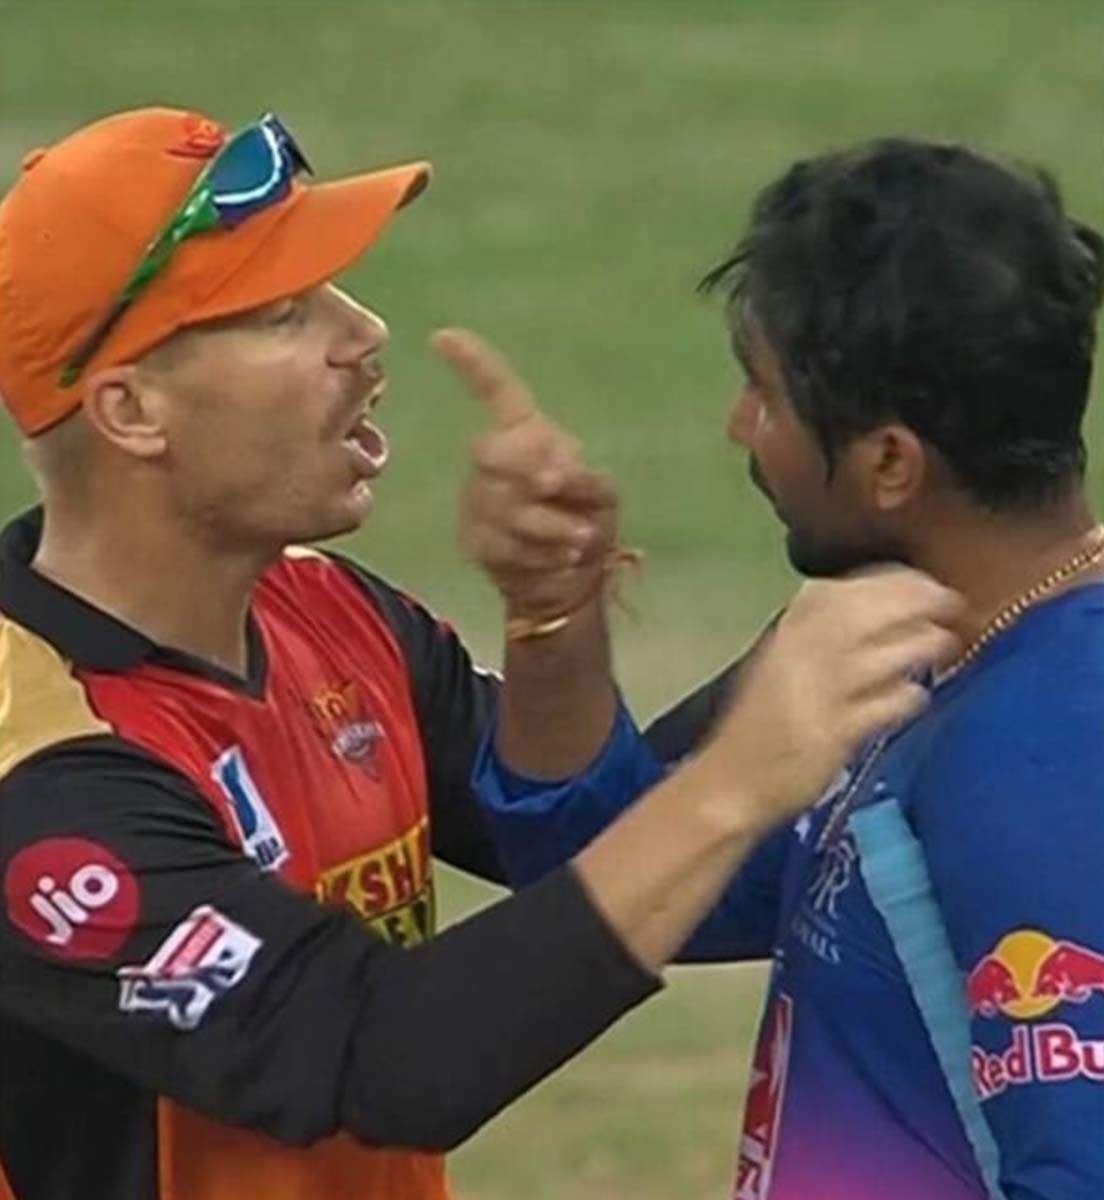 IPL 2020 sees first fight as Rahul Tewatia and Khaleel Ahmed engage in heated arguement